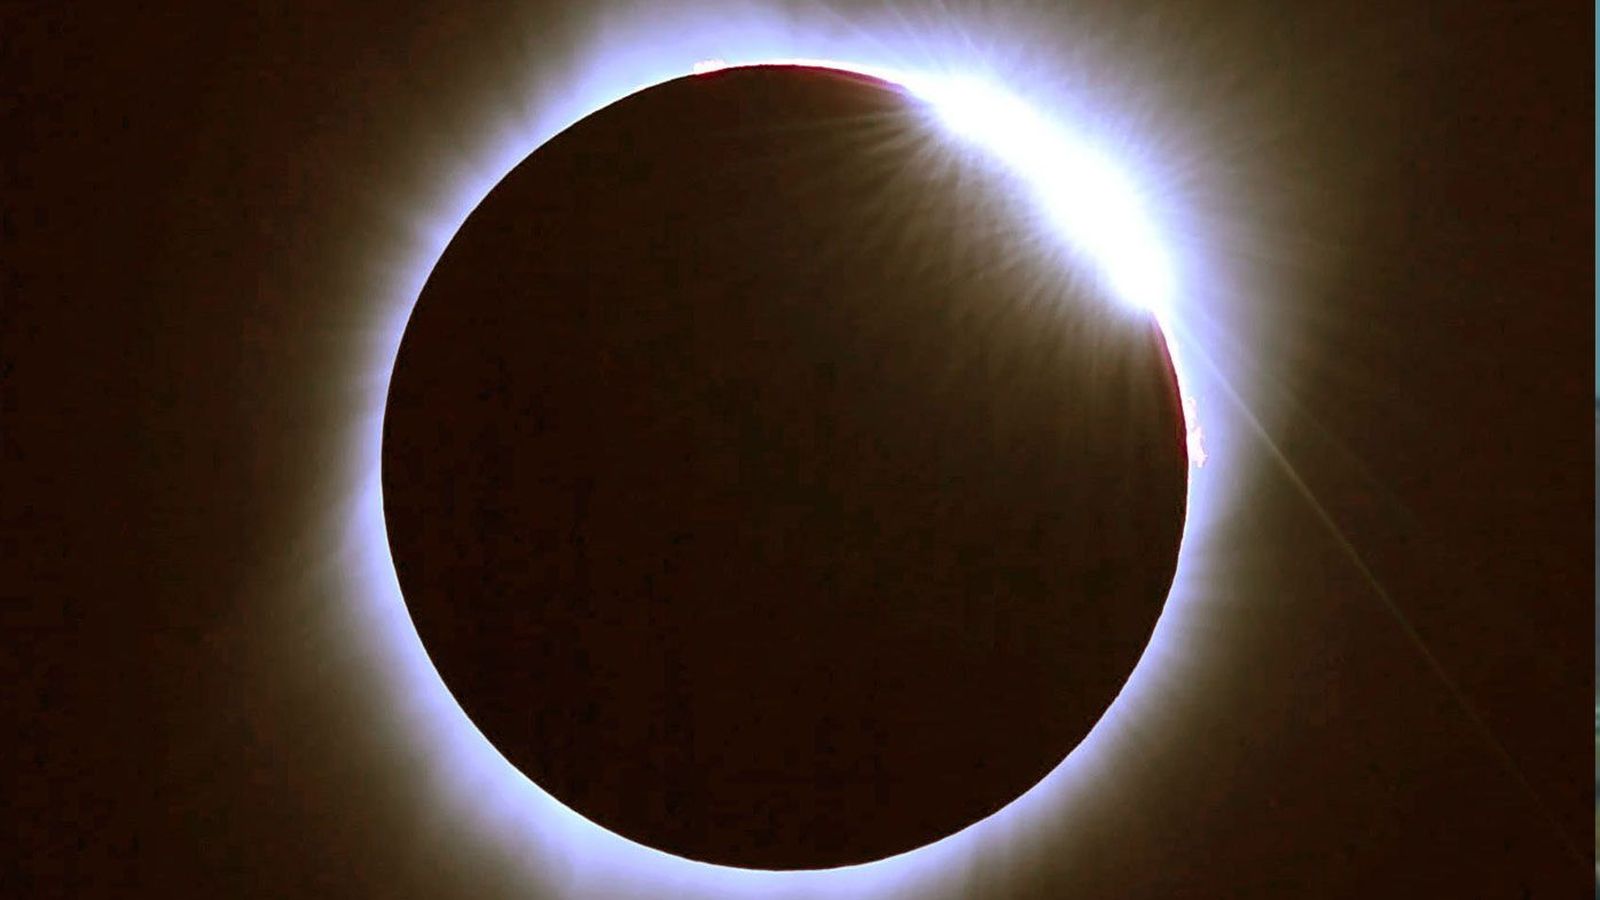 moon covering sun in total eclipse